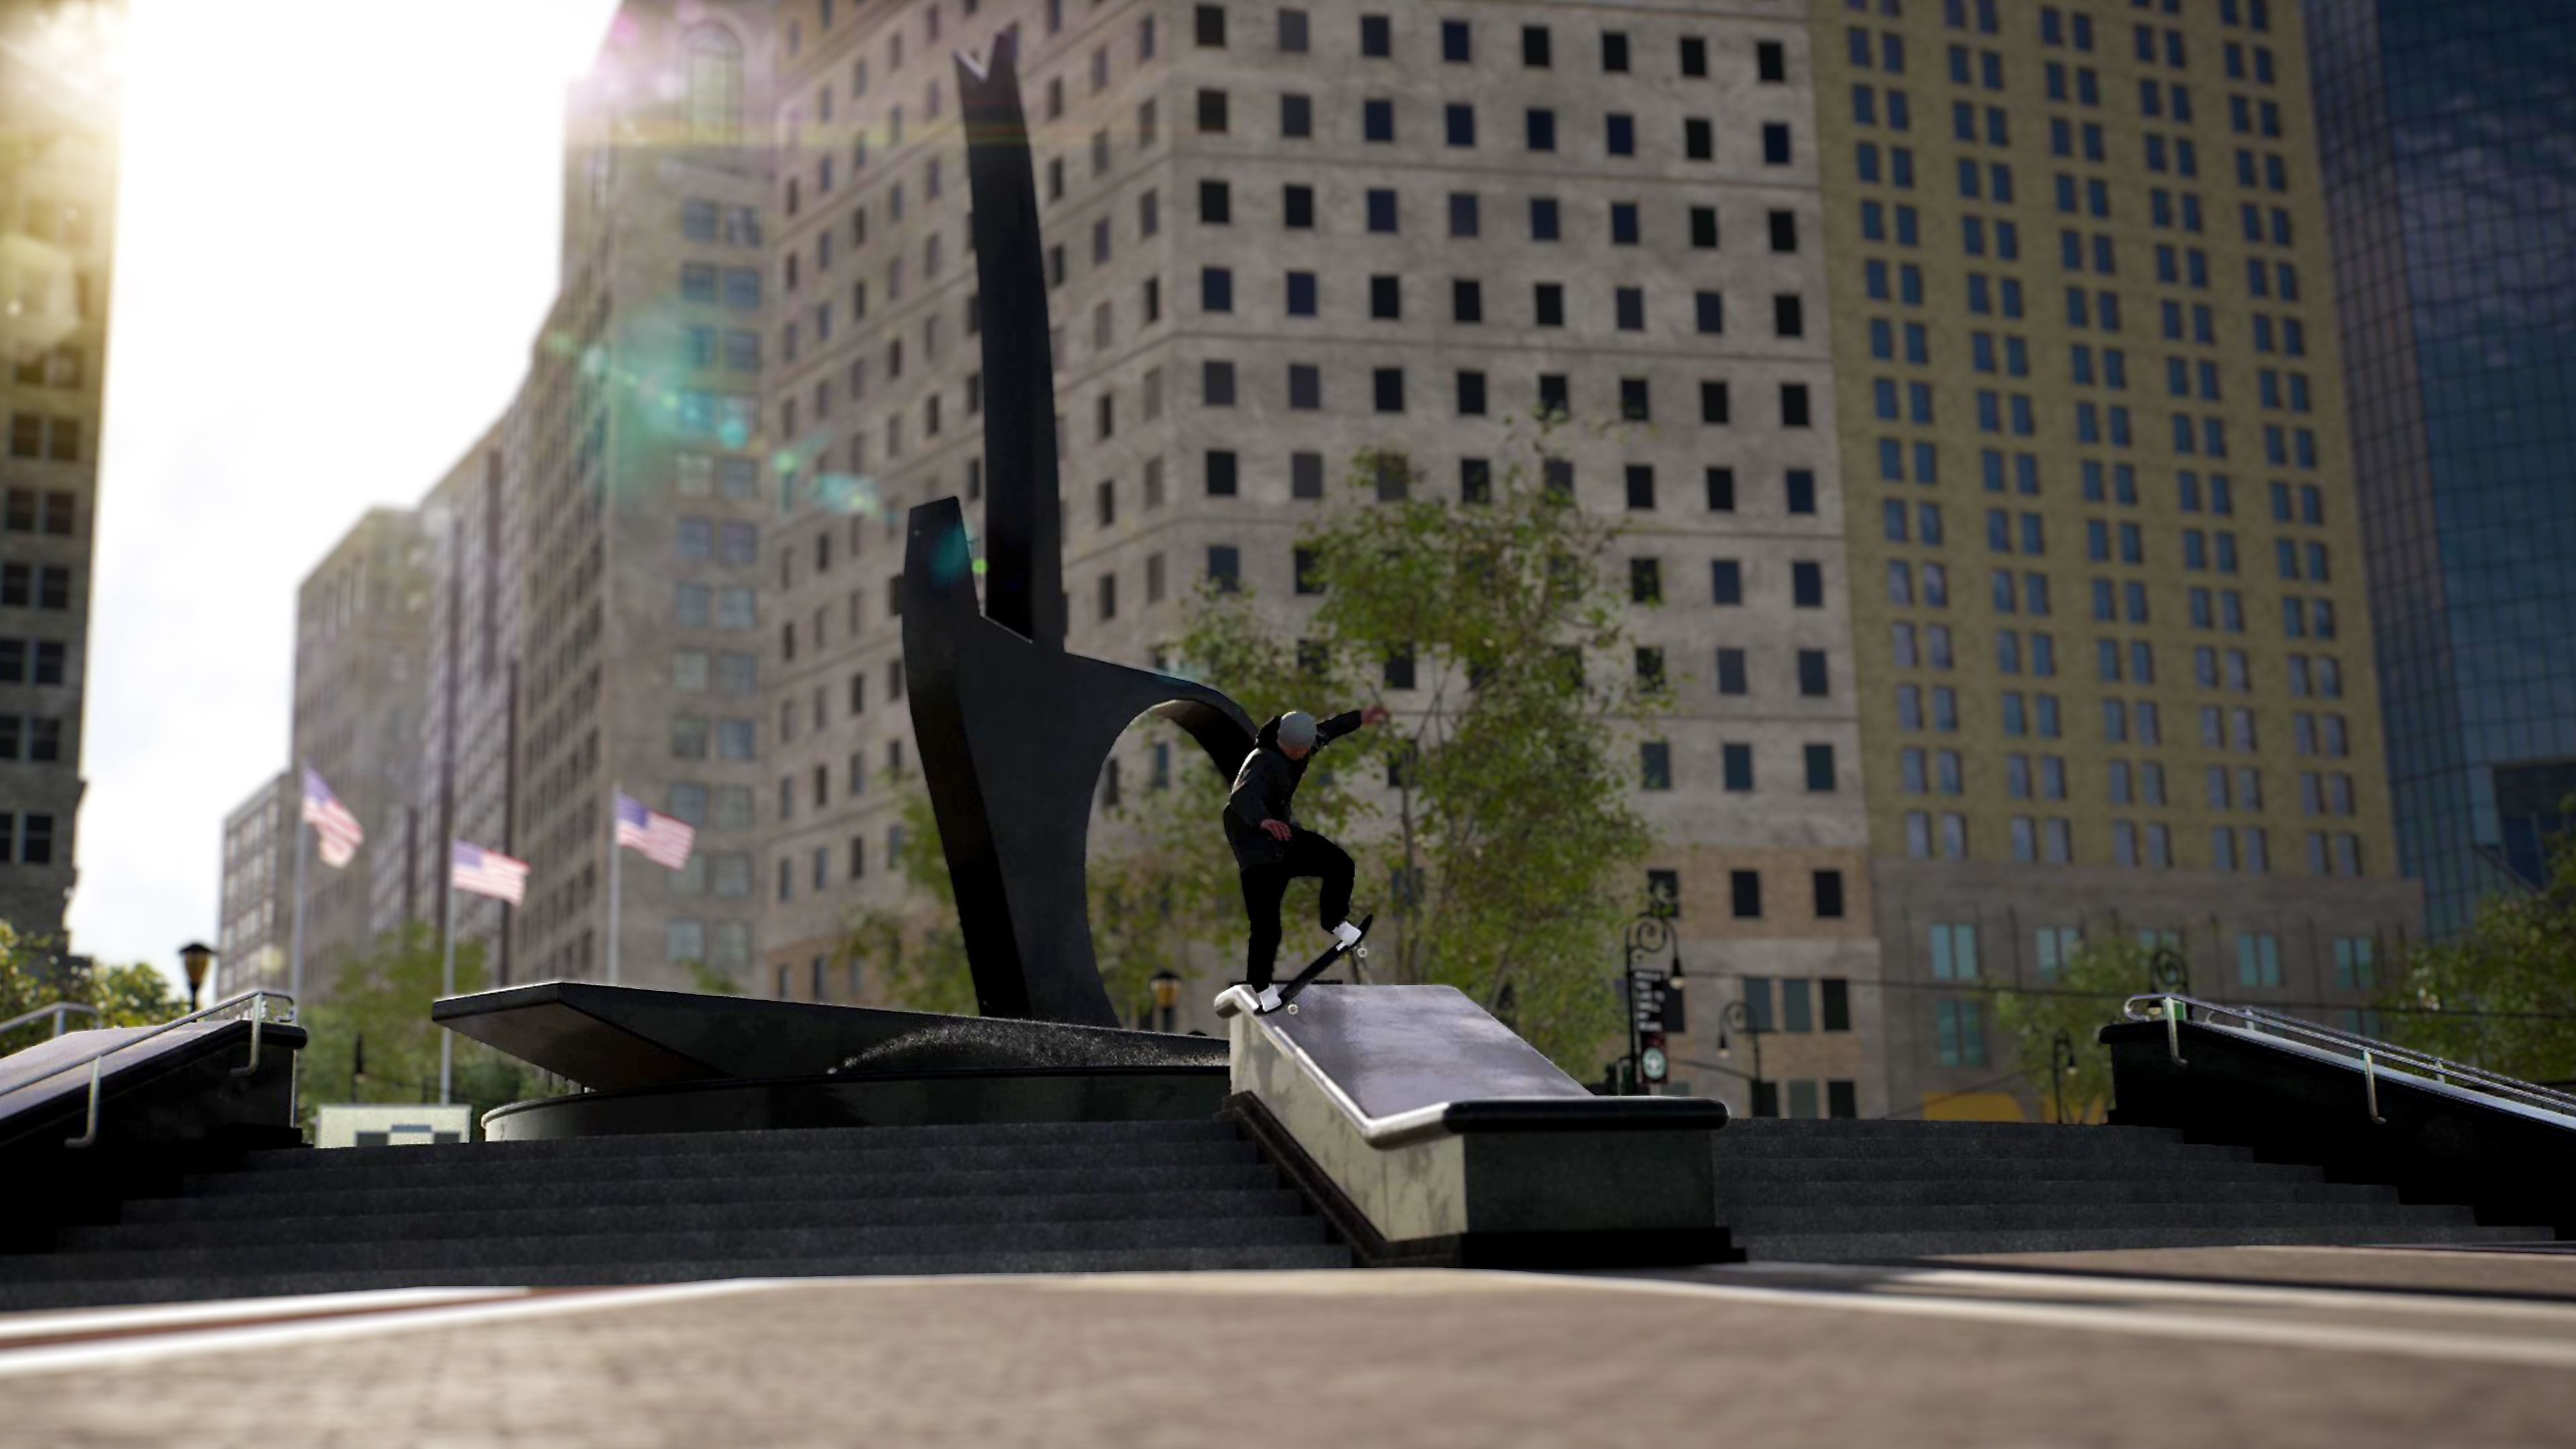 Session: Skate Sim screenshot showing a skater grinding a ledge in a city plaza